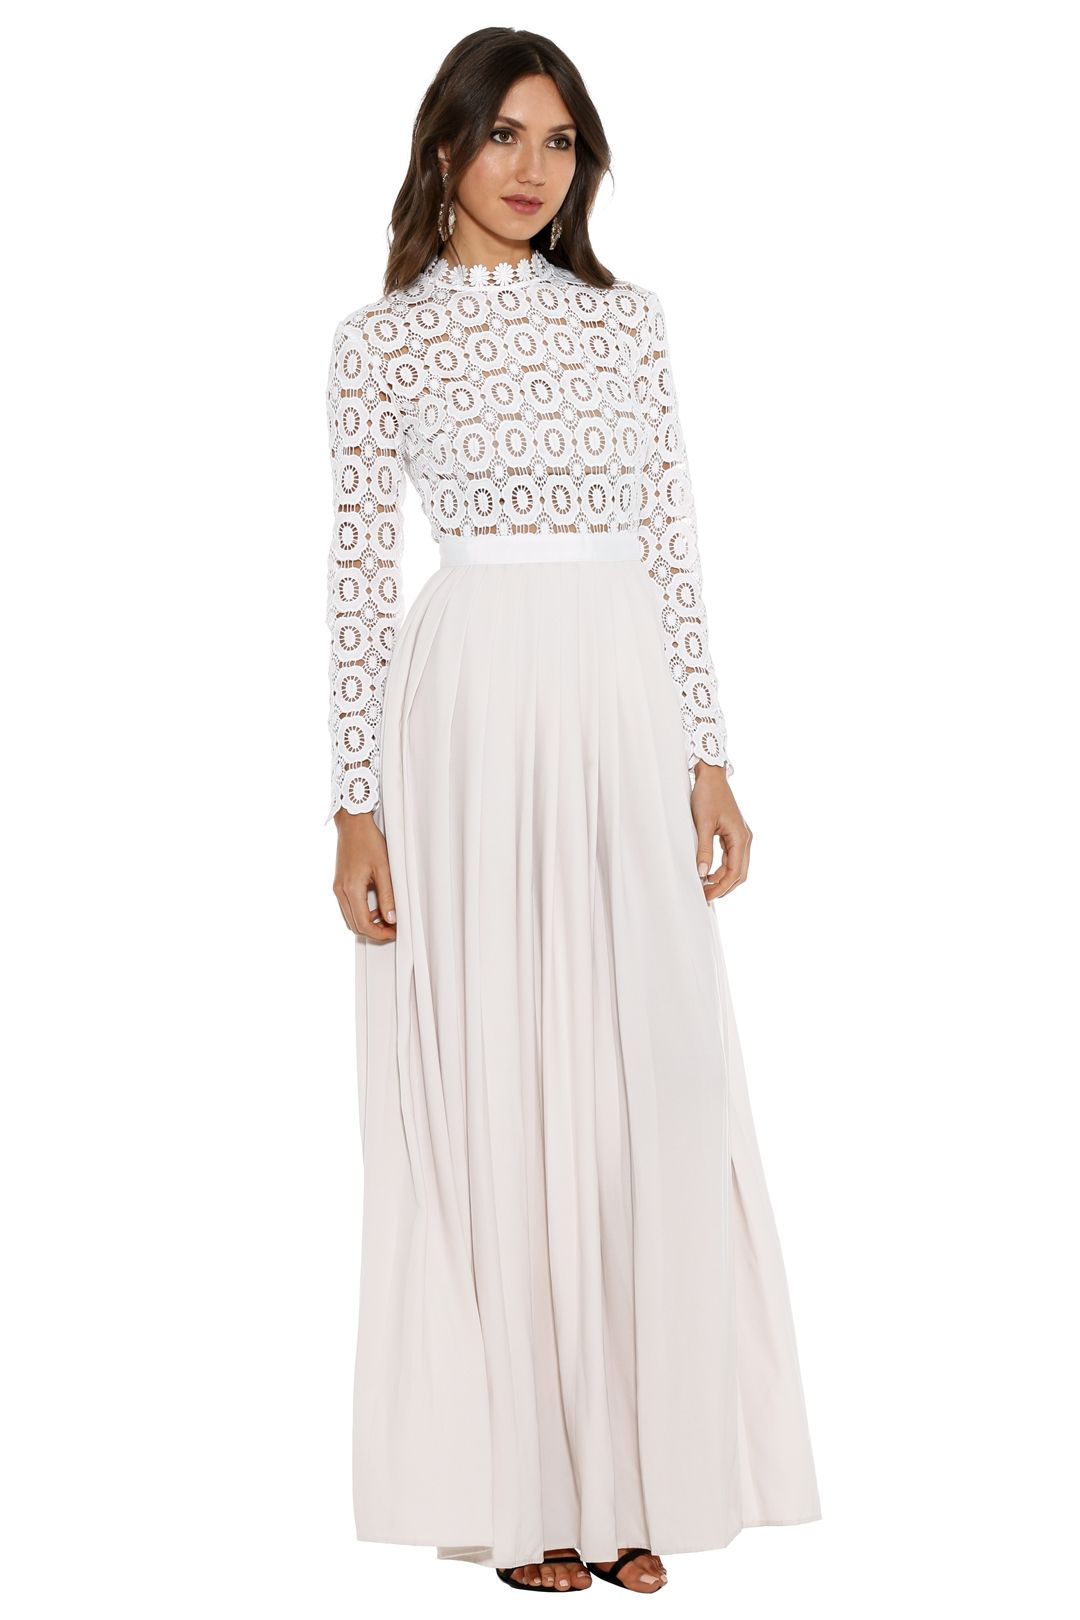 Pleated Crochet Floral Maxi Dress by Self Portrait for Hire